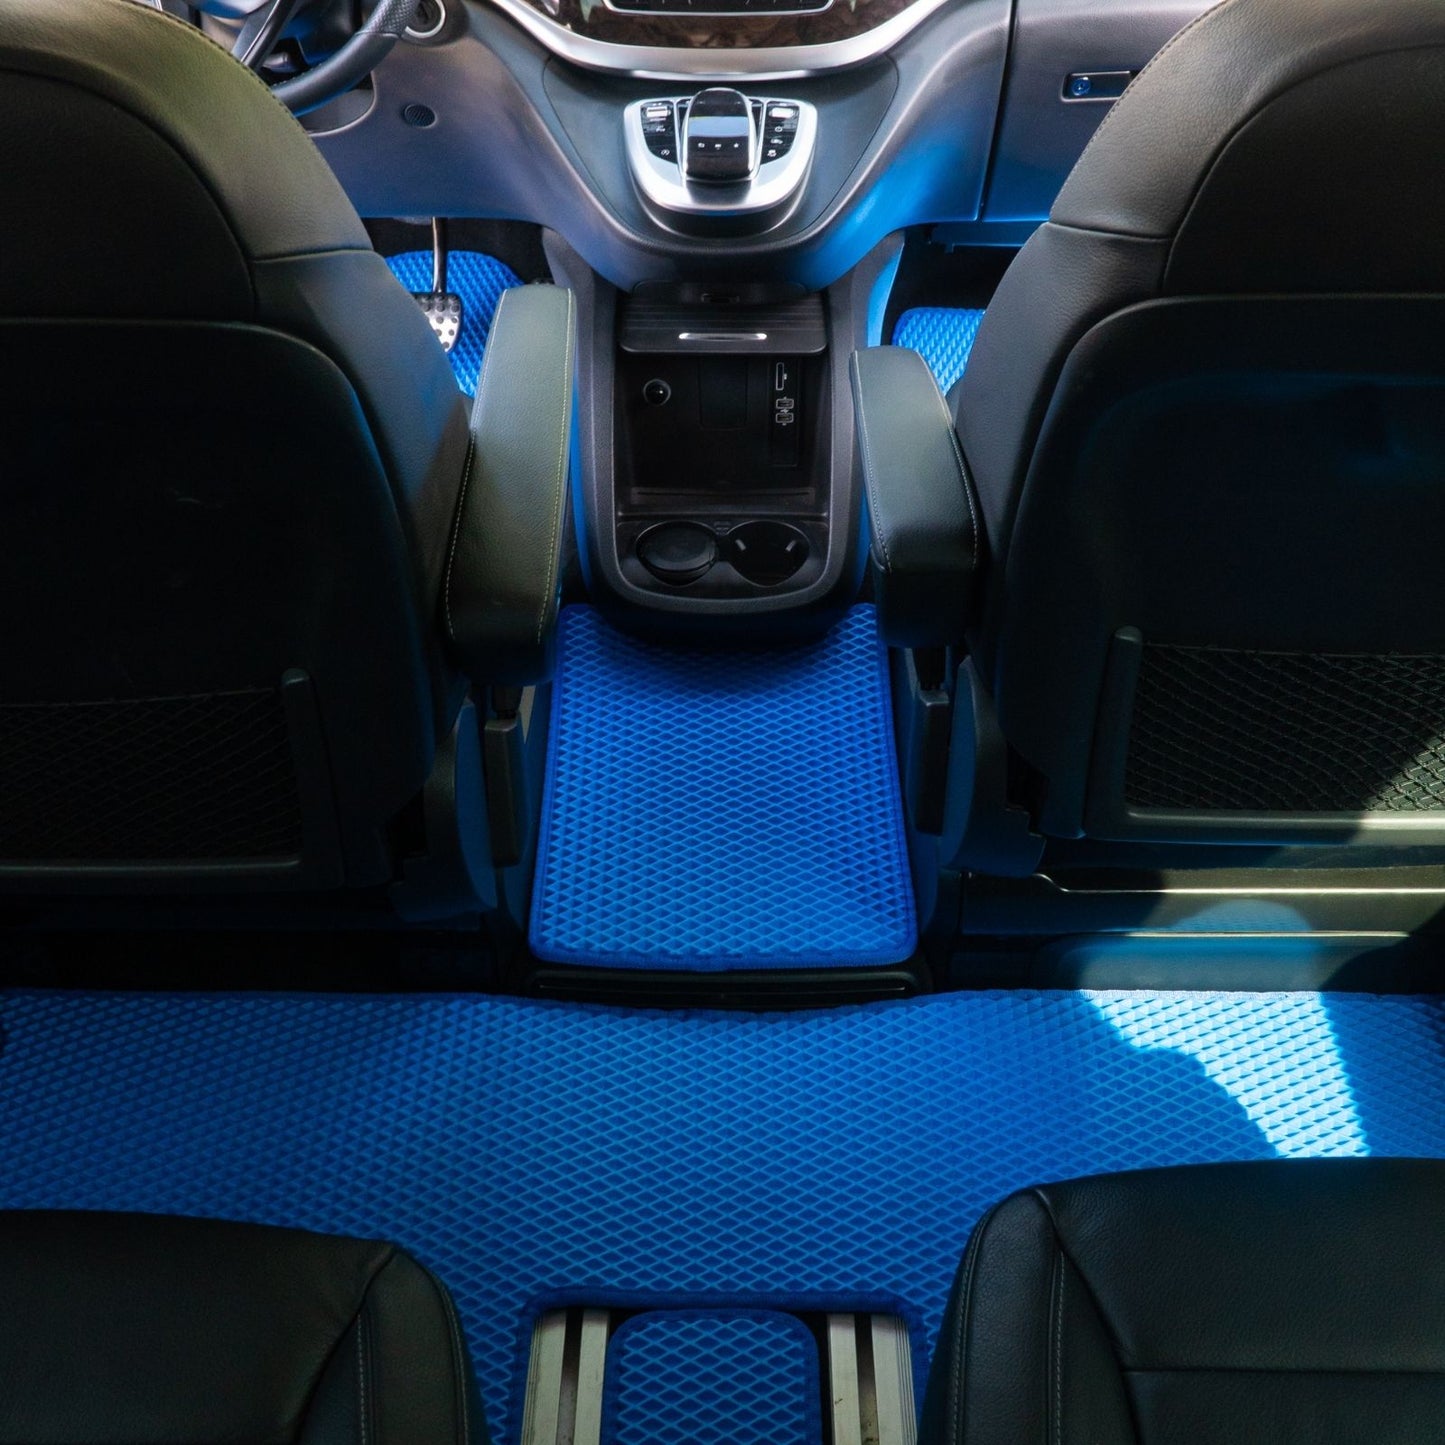 Custom Car Mats for your car - Secure Fit and Easy Clean by Prime EVA